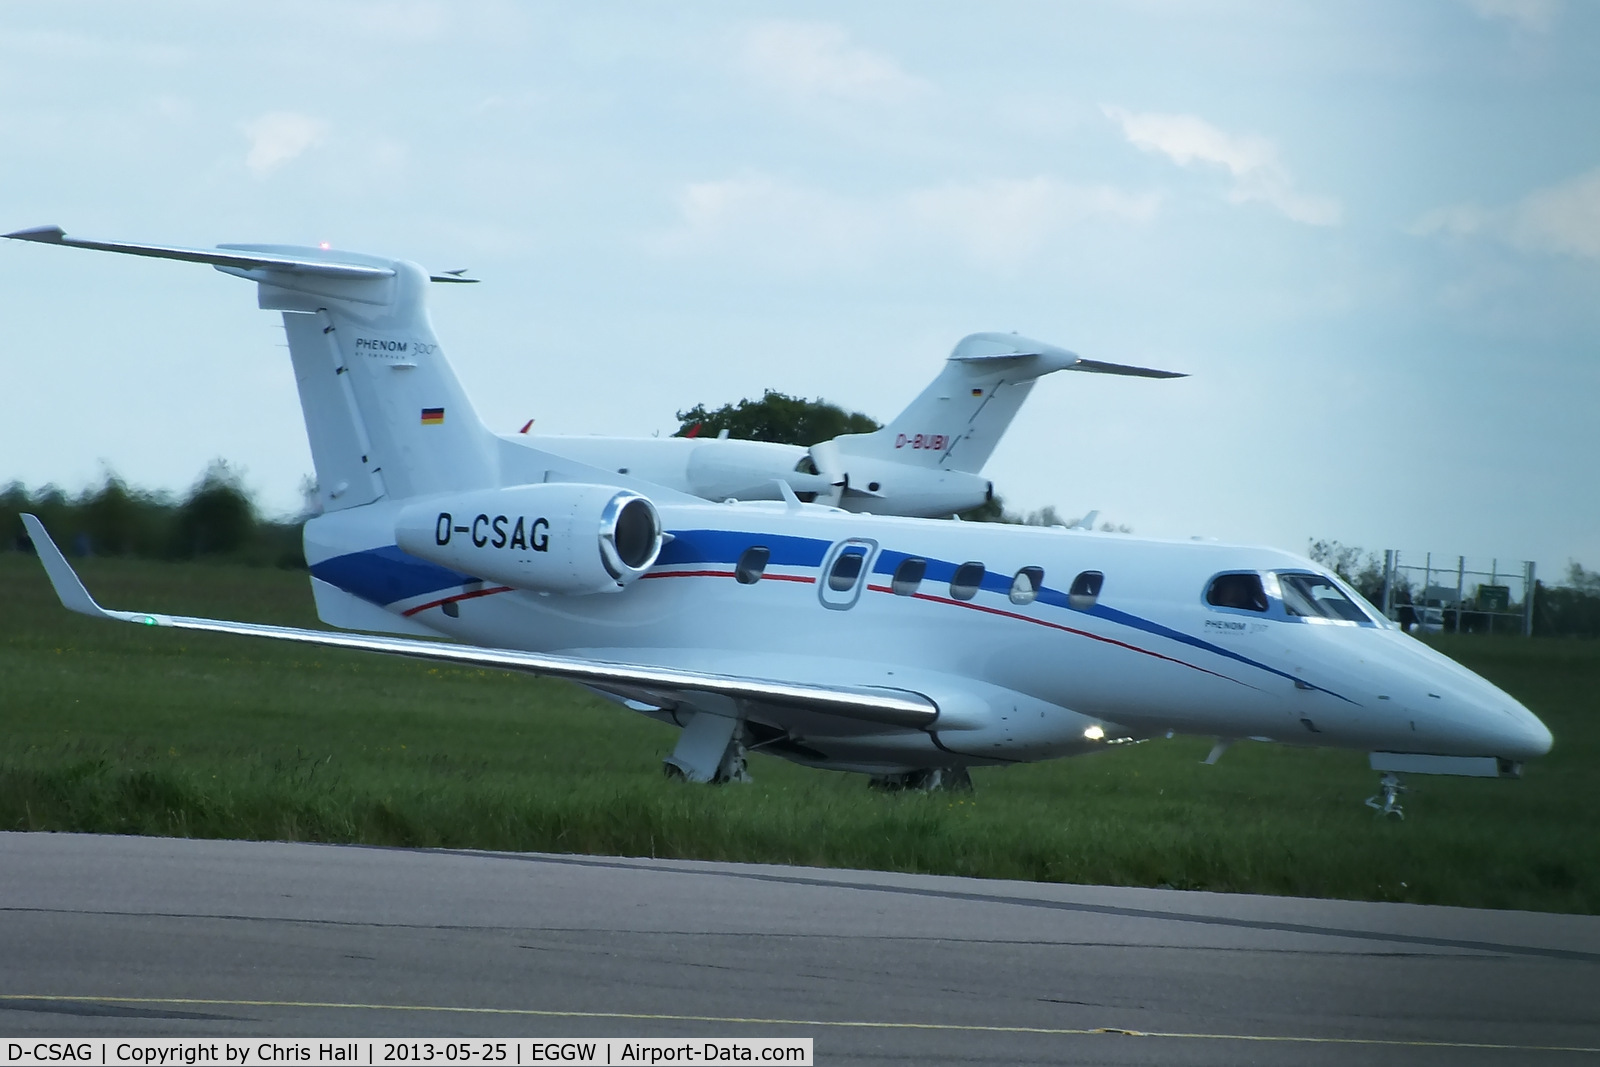 D-CSAG, 2012 Embraer EMB-505 Phenom 300 C/N 50500101, visitor for the Champions League Final